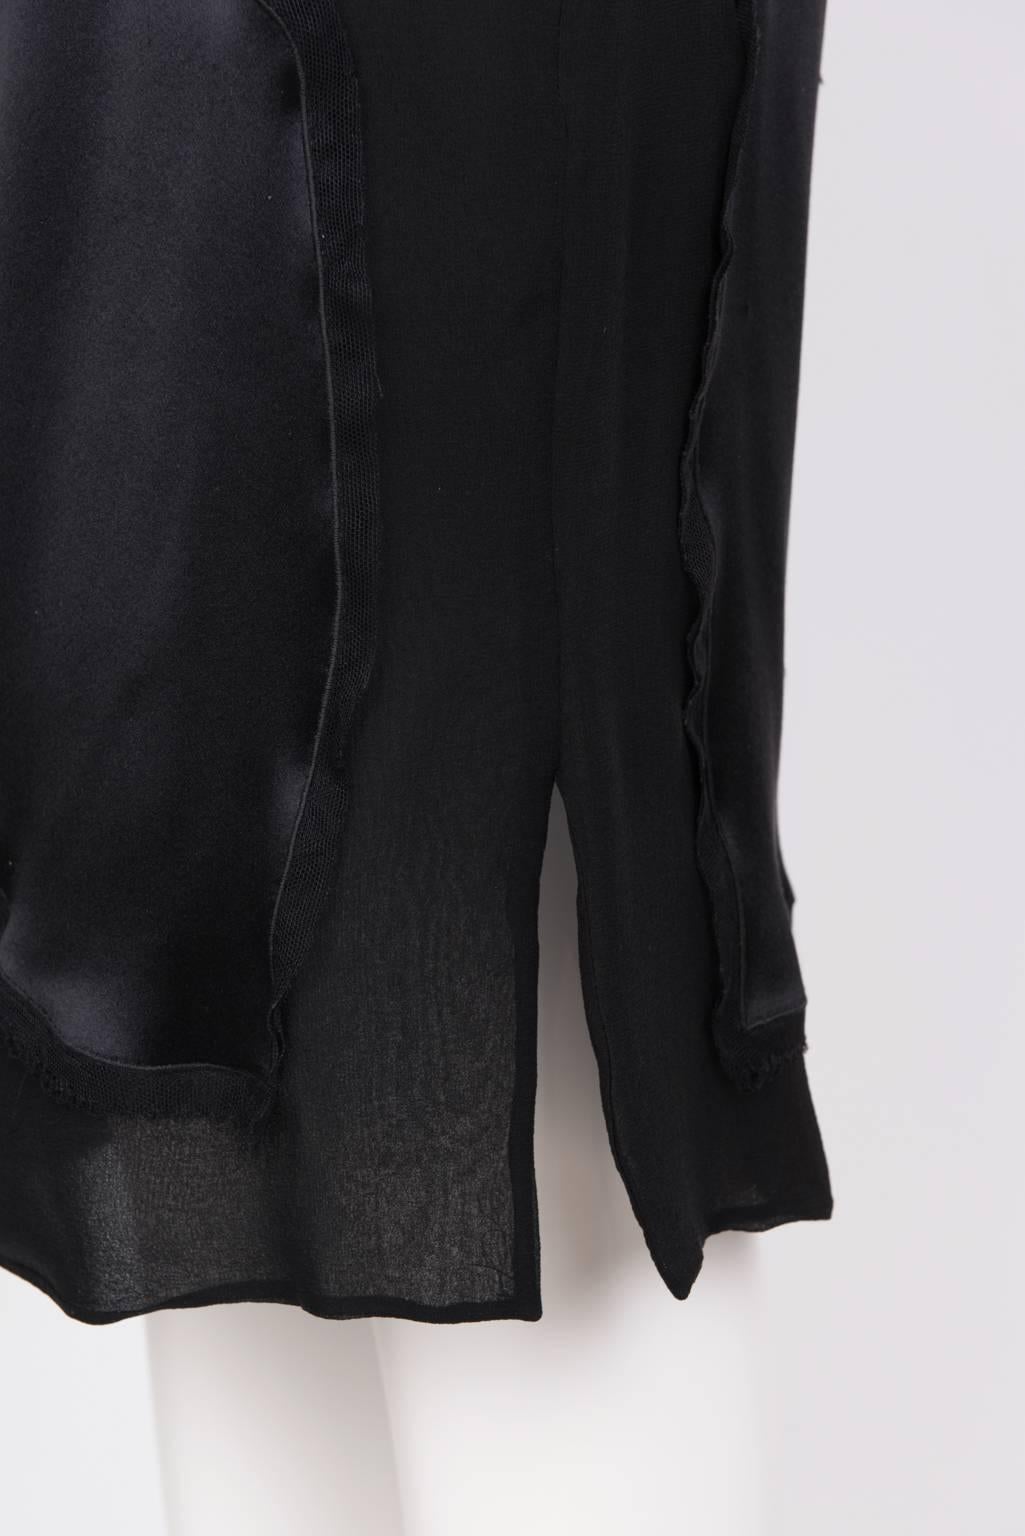 YVES SAINT LAURENT Pencil Skirt In Black Satin And Silk Crepe For Sale 2